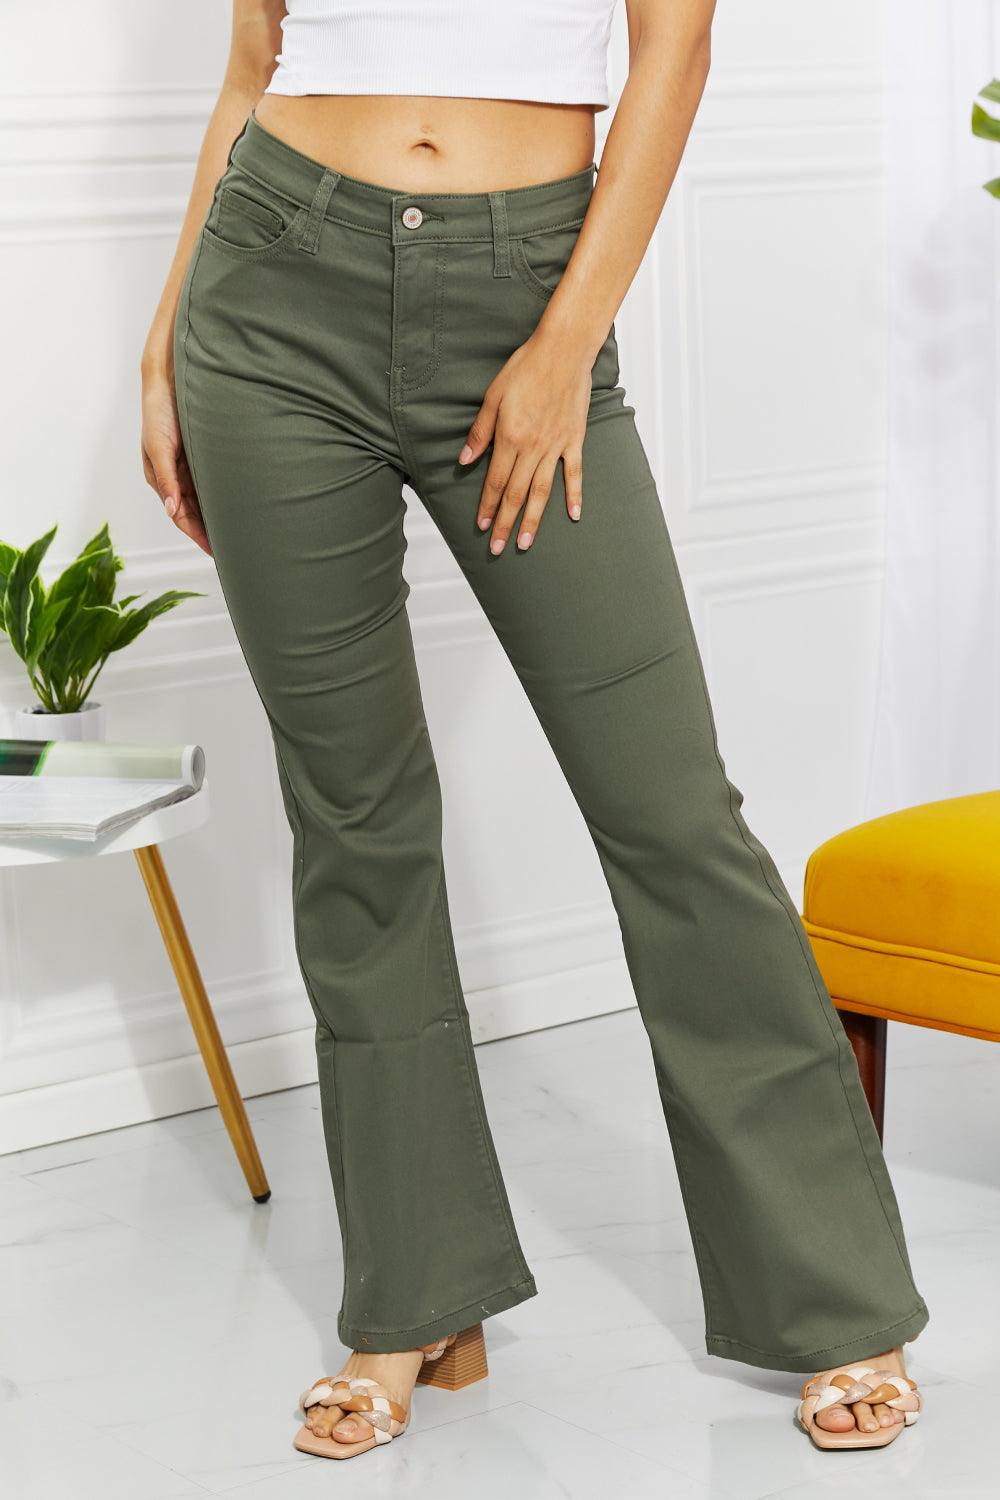 Zenana Clementine Full Size High-Rise Bootcut Jeans in Olive - BELLATRENDZ